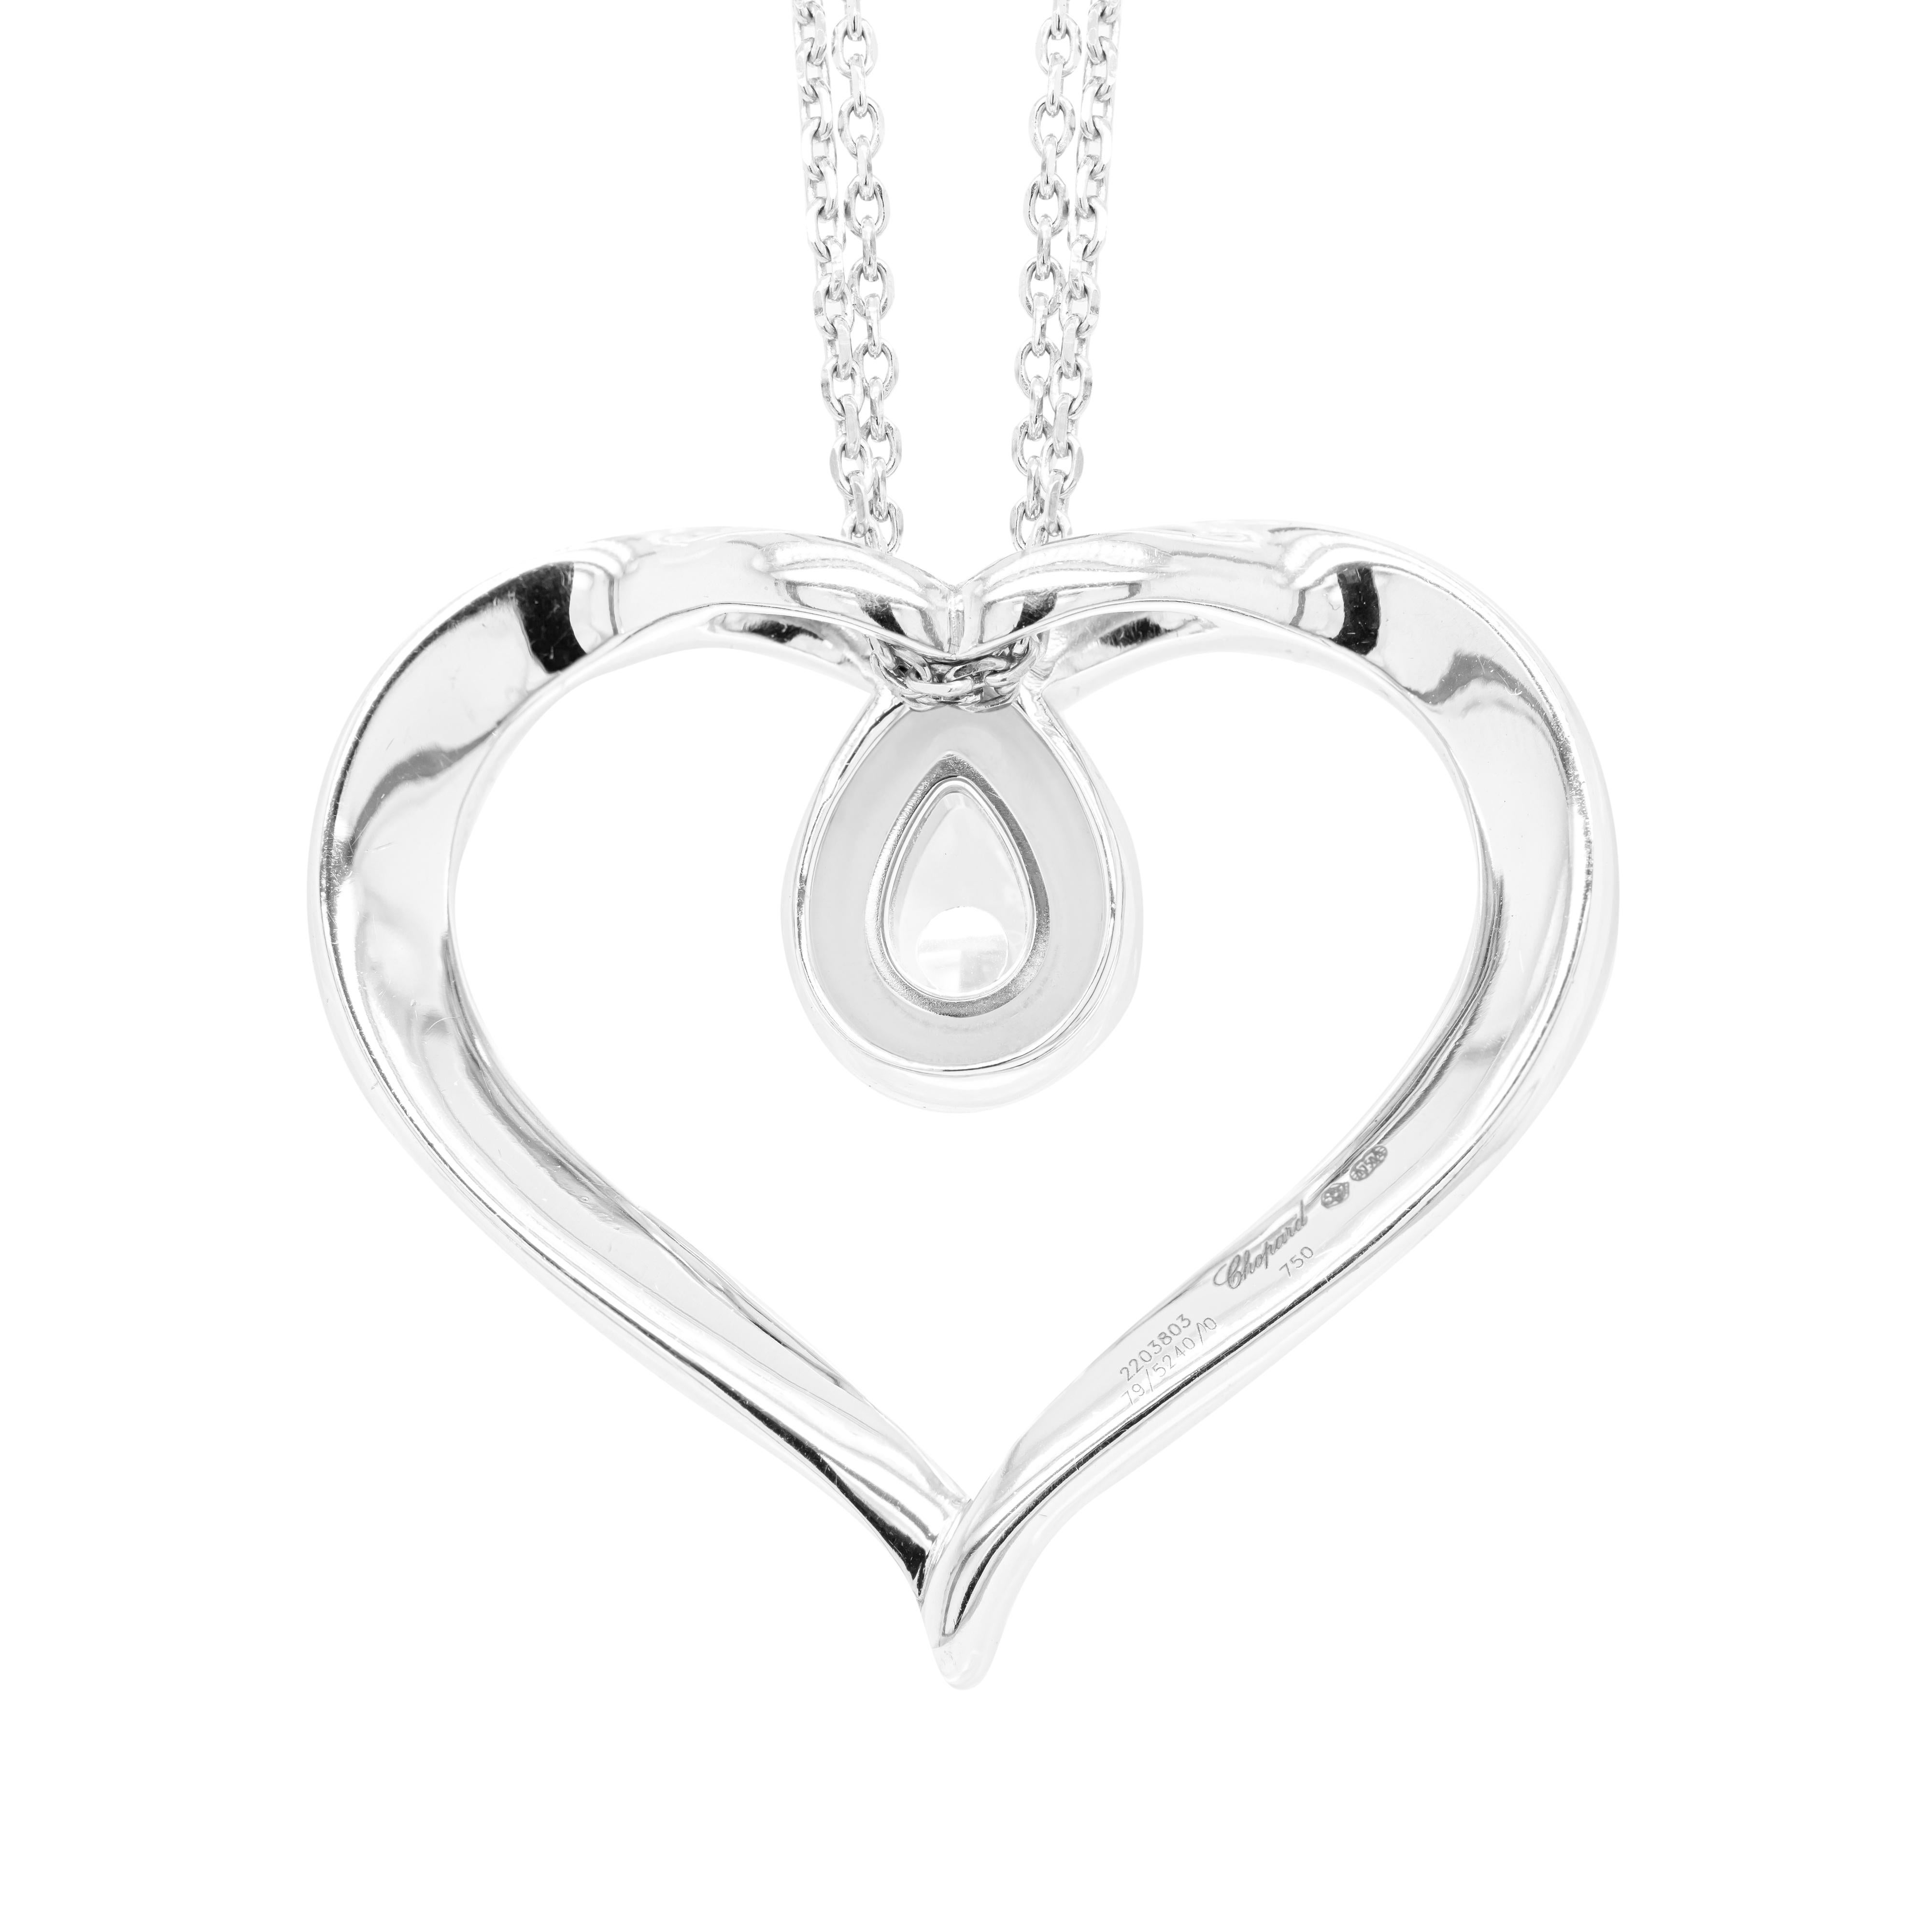 Beautiful loop heart pendant from Chopard's iconic Happy Diamonds collection inlaid with 48 fine round brilliant cut diamonds, weighing a total approximate weight of 2.00 carats. Chopard's signature mobile 'Happy Diamond' is beautifully encased